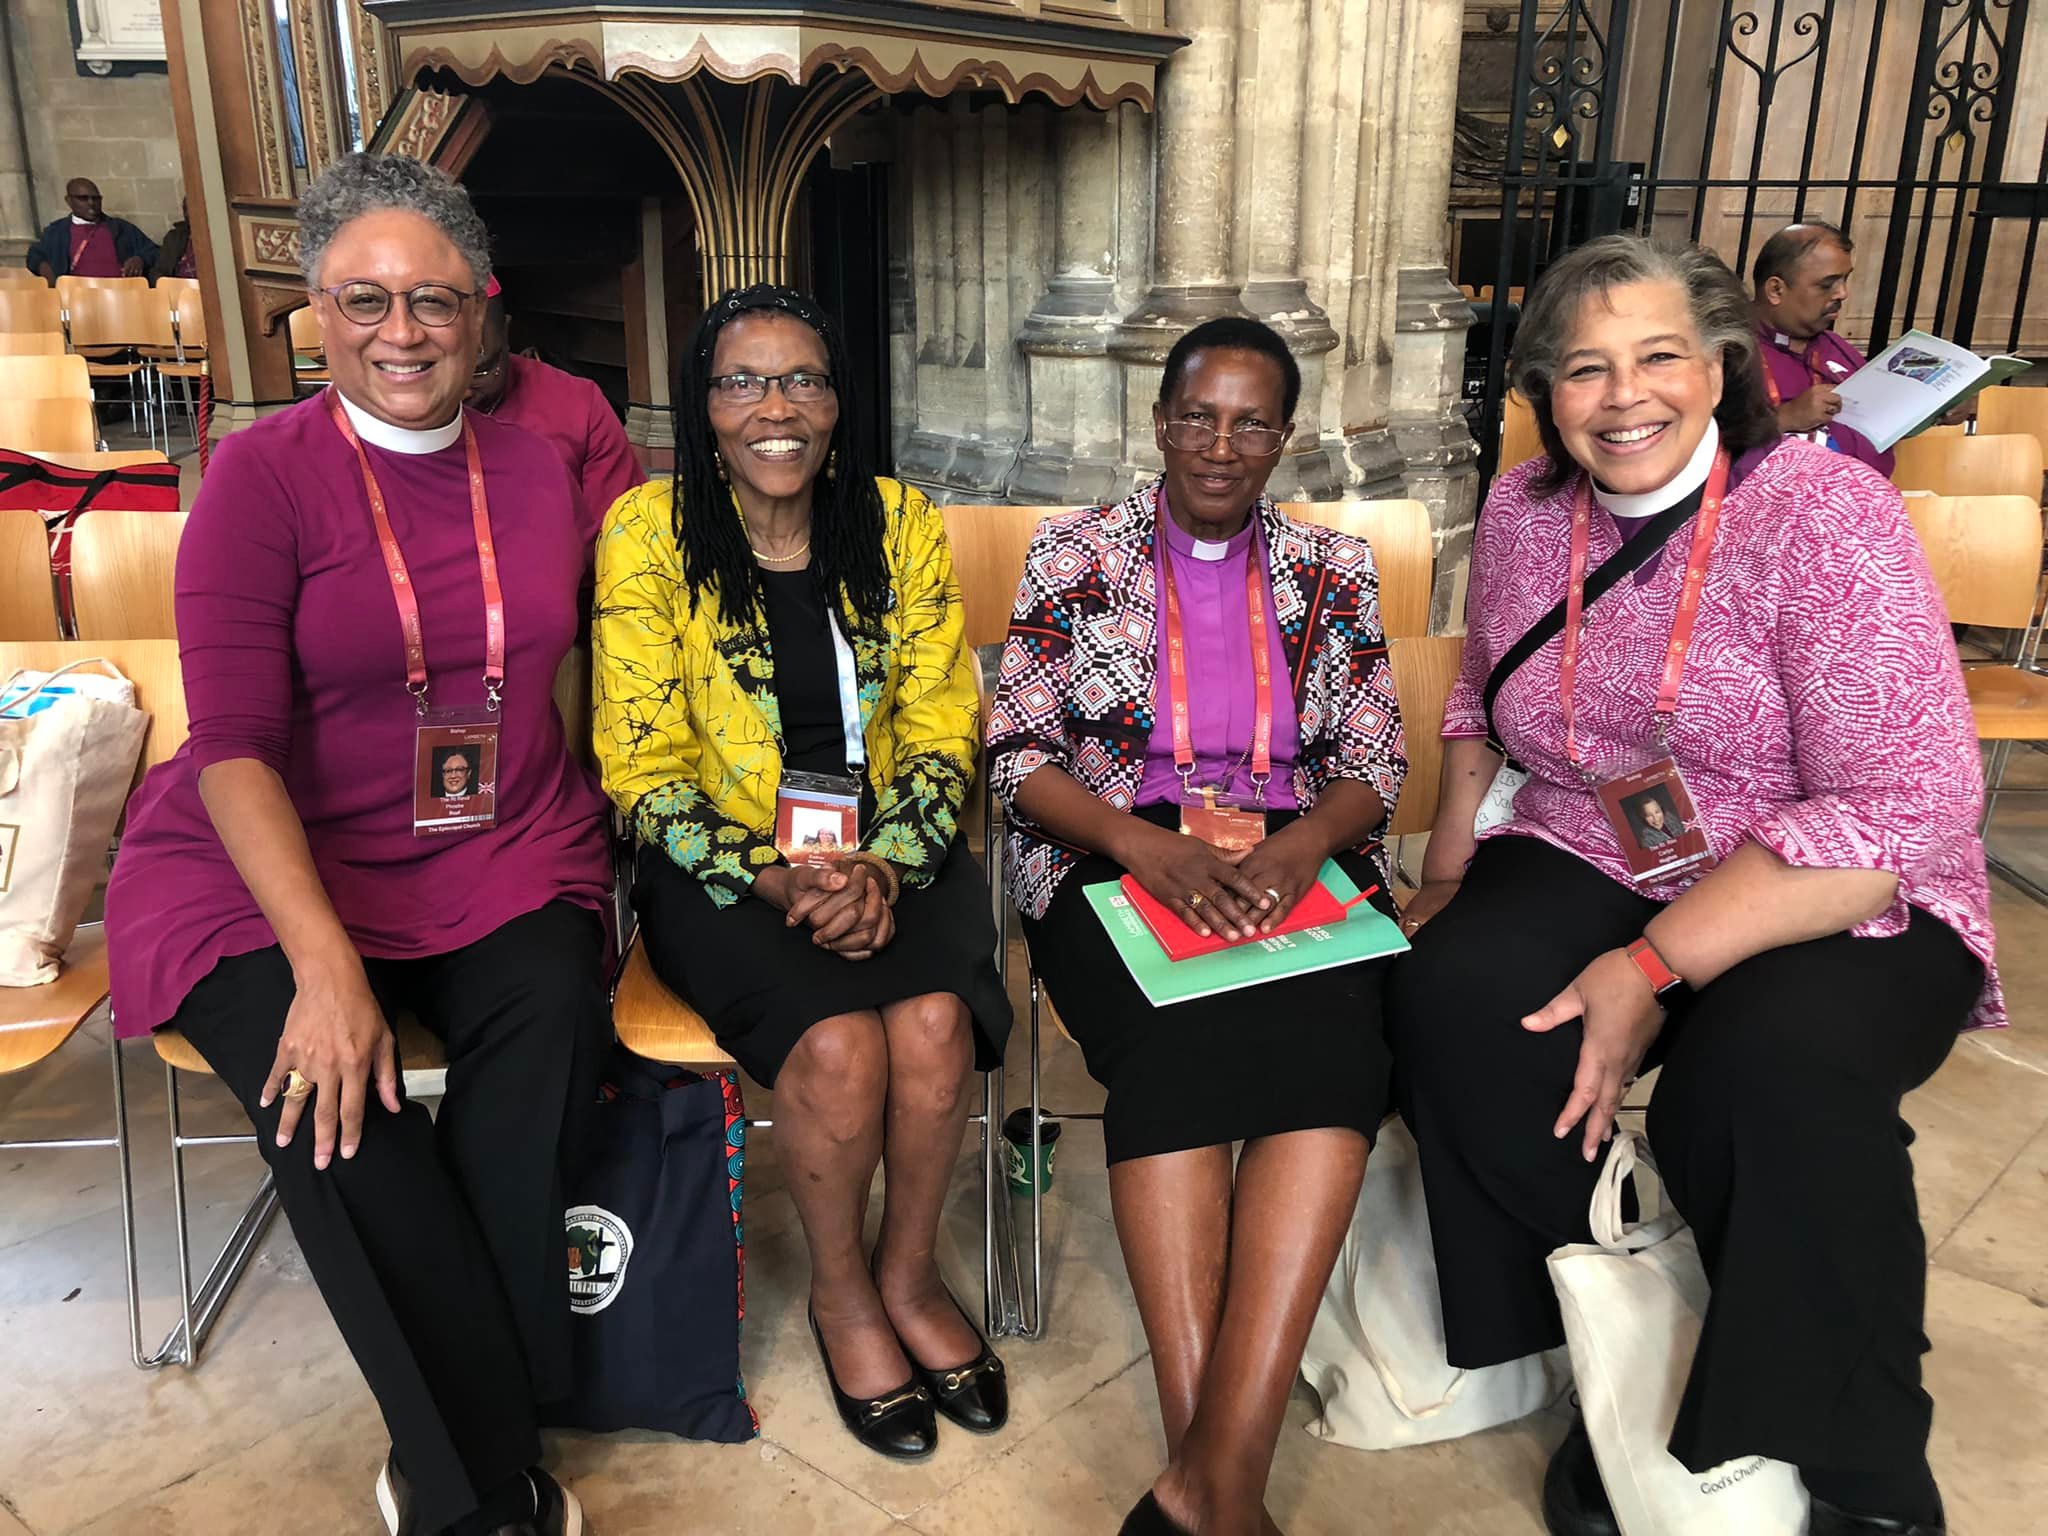 Day 2 - July 28: Bishop Hughes with Bisho Phoebe Roaf of West Tennessee, Lambeth speaker Dr. Esther M. Mombo, and Bishop Emily Onyango, the first woman elected to the Episcopacy in Kenya.